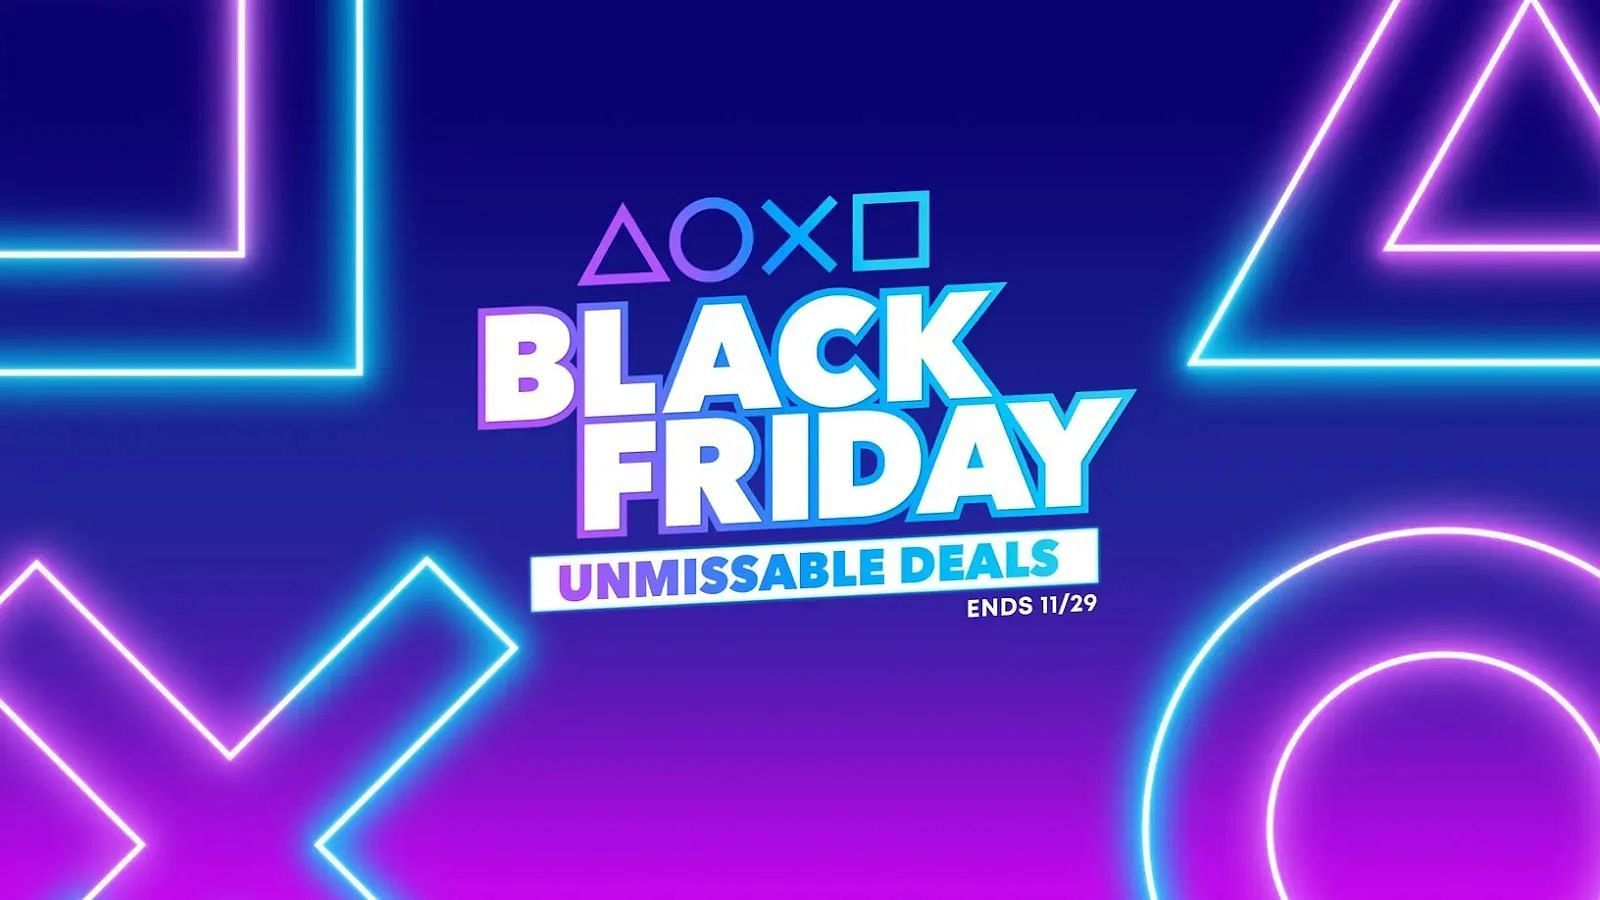 Black Friday deals on PS4 and PS5 games (Image by PlayStation)